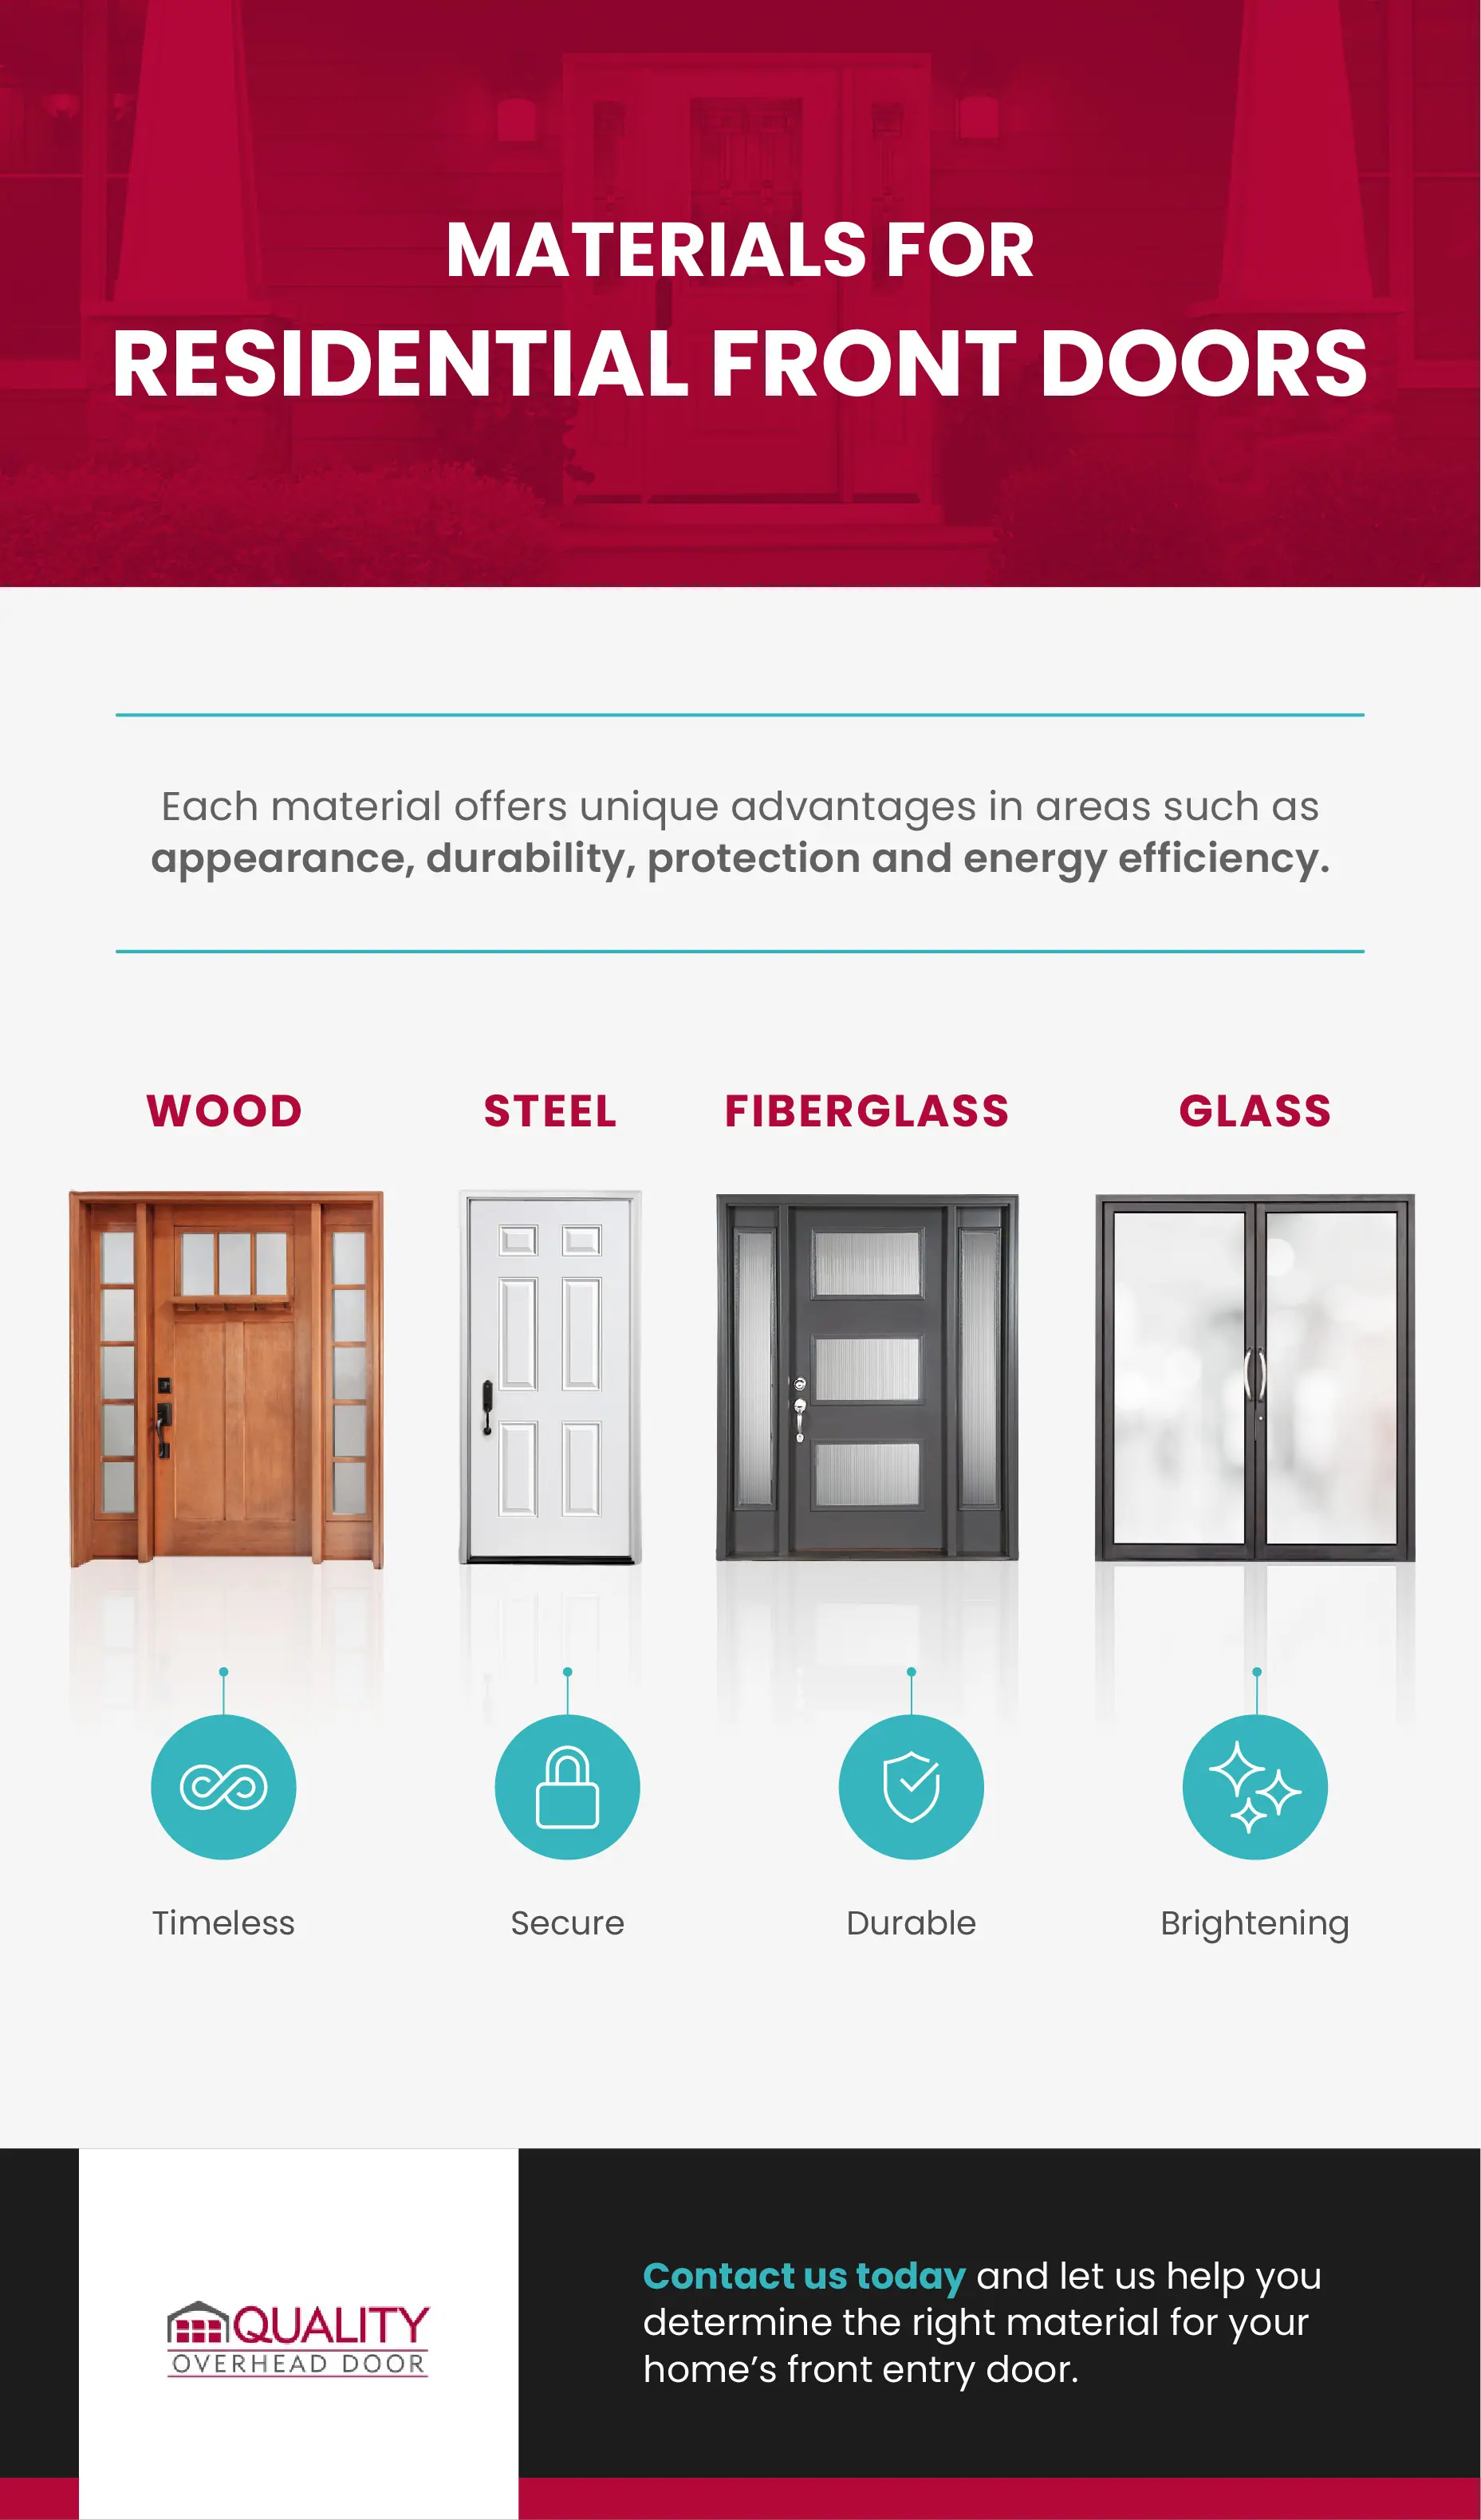 Materials for Residential Front Doors. Each material offers unique advantages in areas such as appearance, durability, protection and energy efficiency.